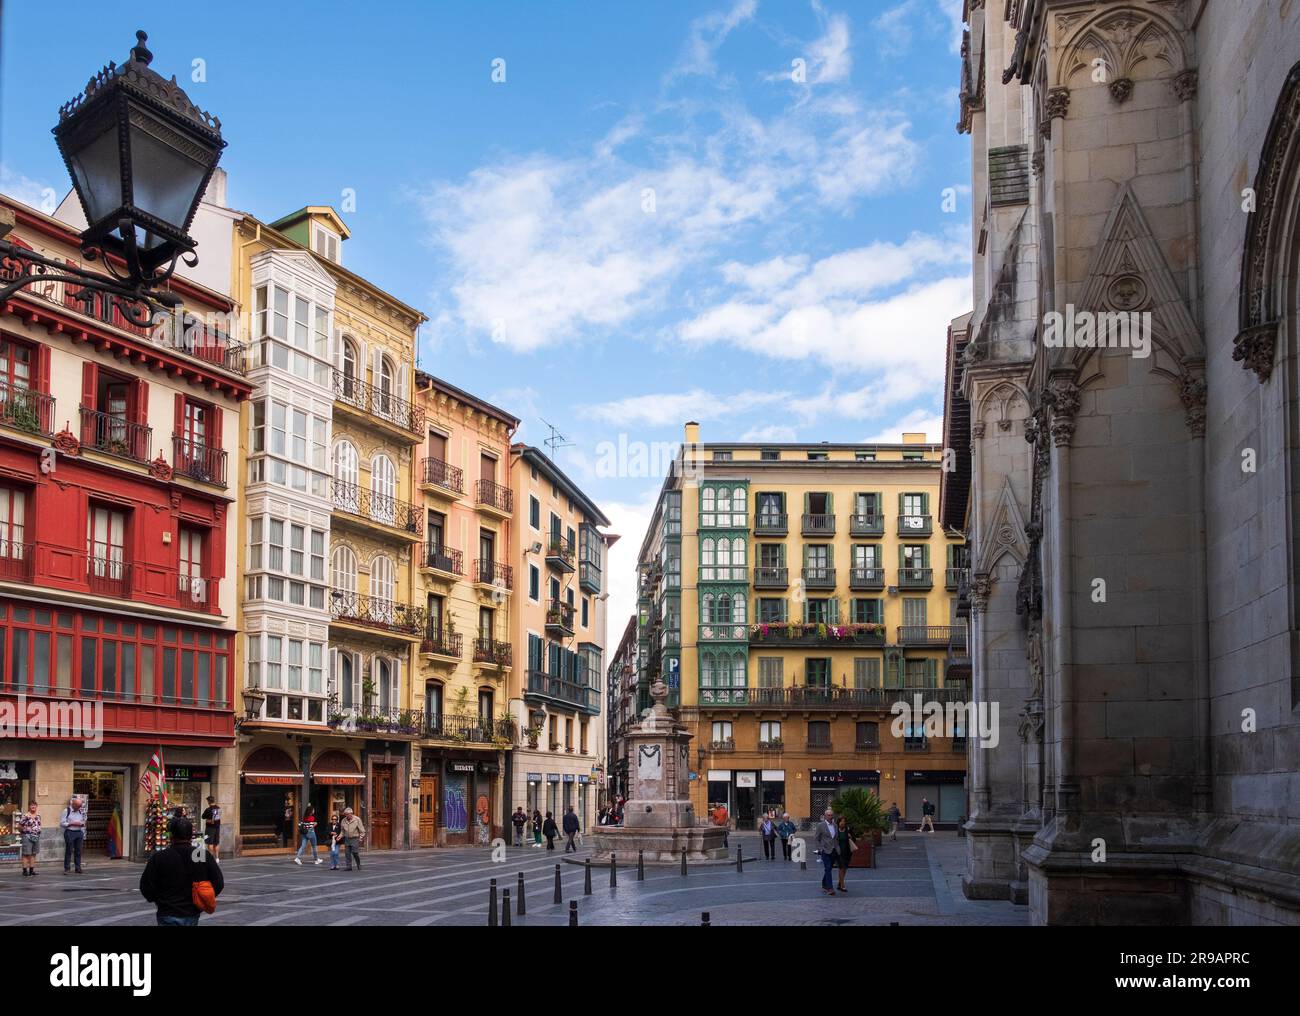 Casco Viejo or old town area with plaza and cathedral, Bilbao, Basque, Spain Stock Photo